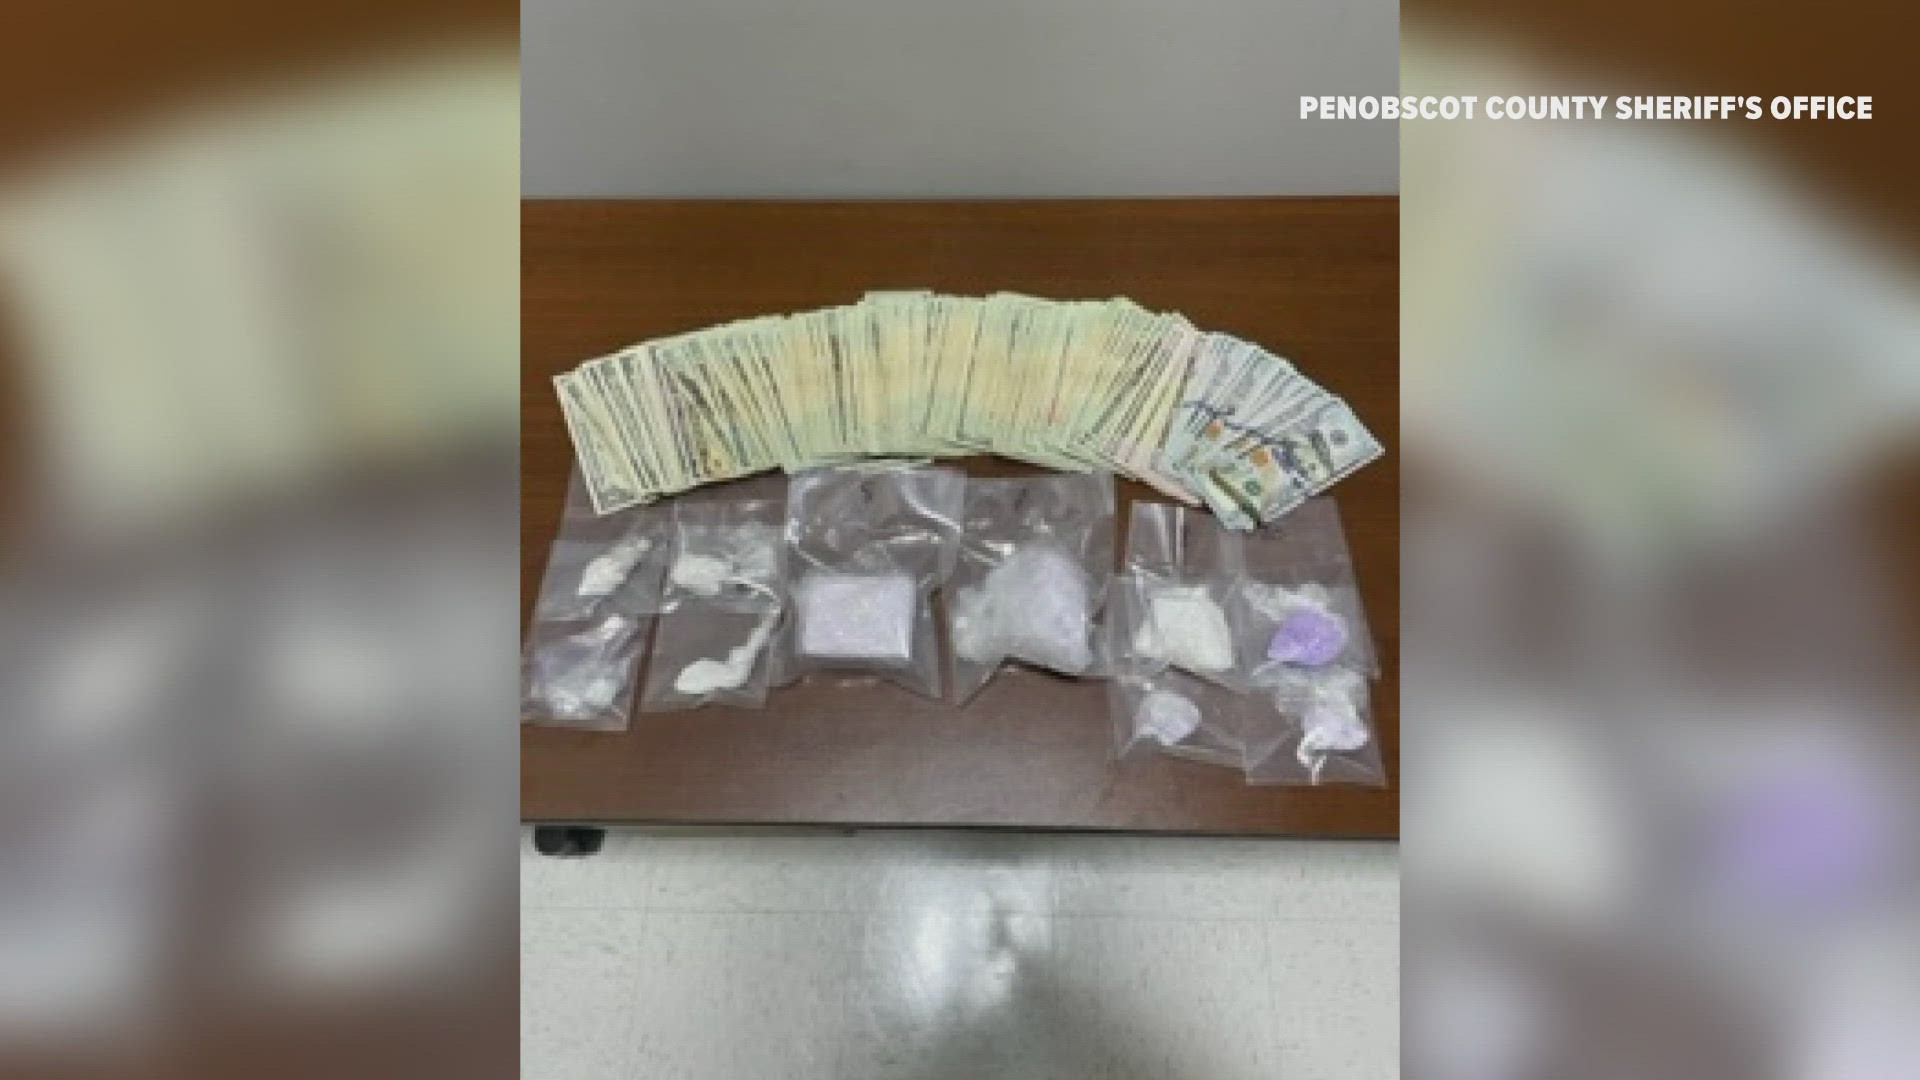 A large amount of stolen property was recovered in addition to a pound of drugs, the Penobscot County Sheriff's Office said.